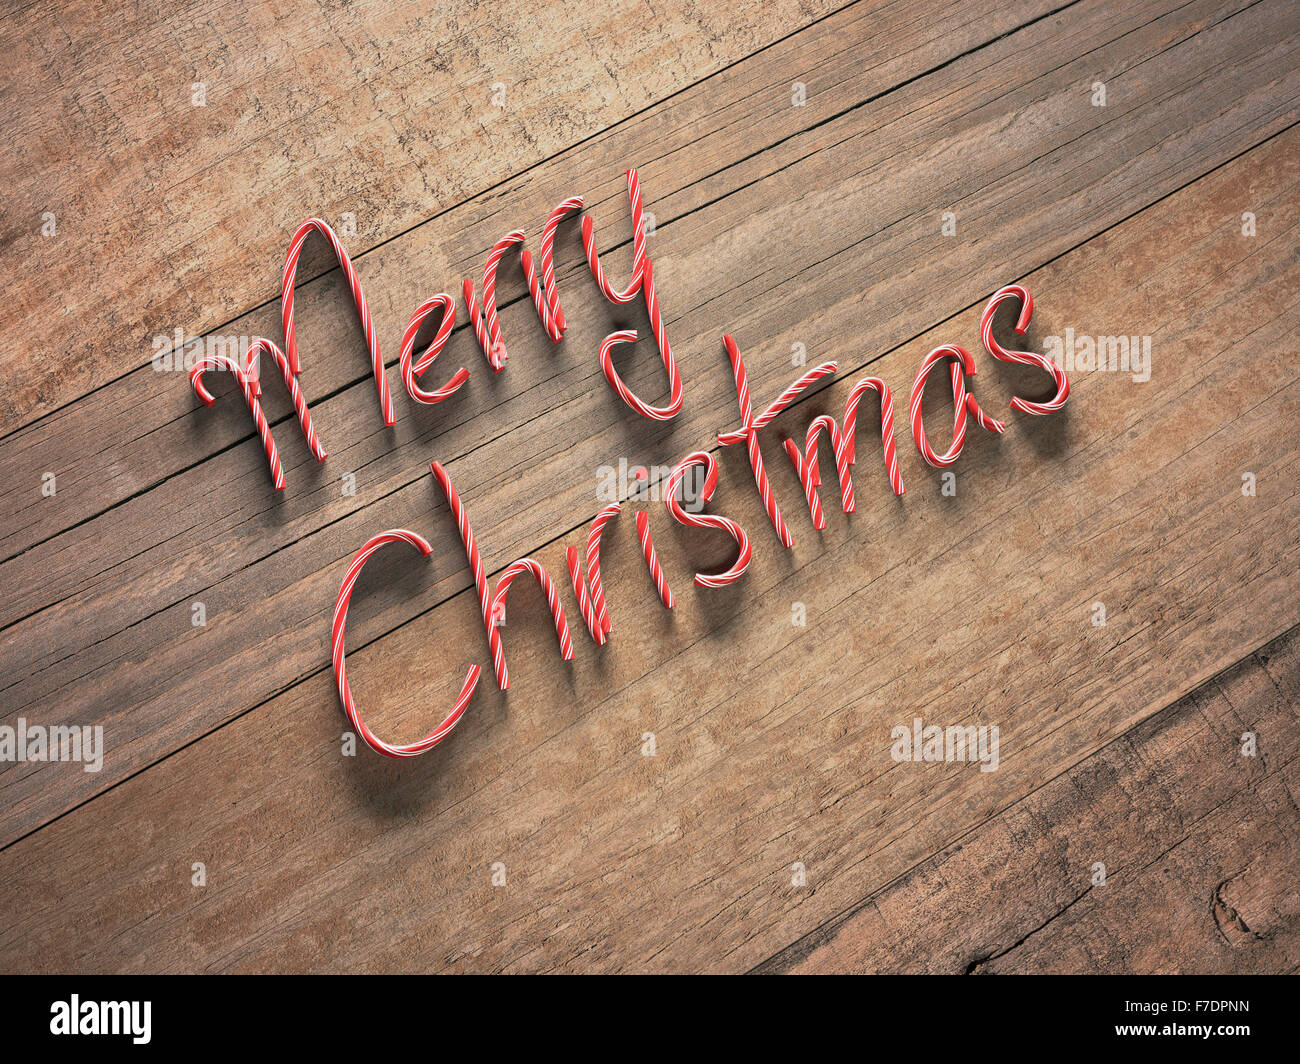 Merry Christmas written in red and white candy on an old wooden table. Depth of field applied with focus on center of the image. Stock Photo